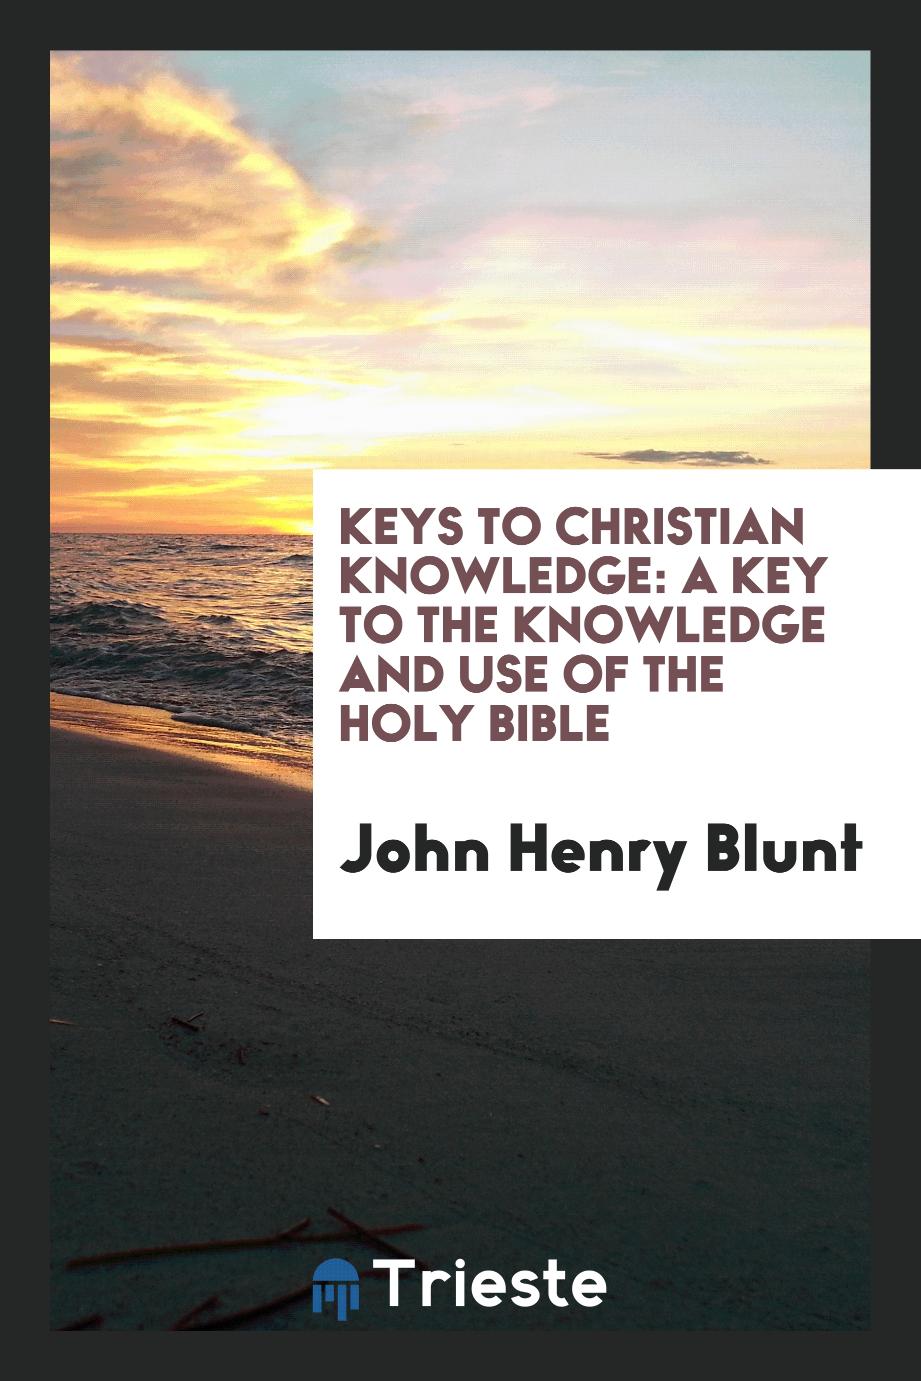 Keys to Christian knowledge: A key to the knowledge and use of the Holy Bible